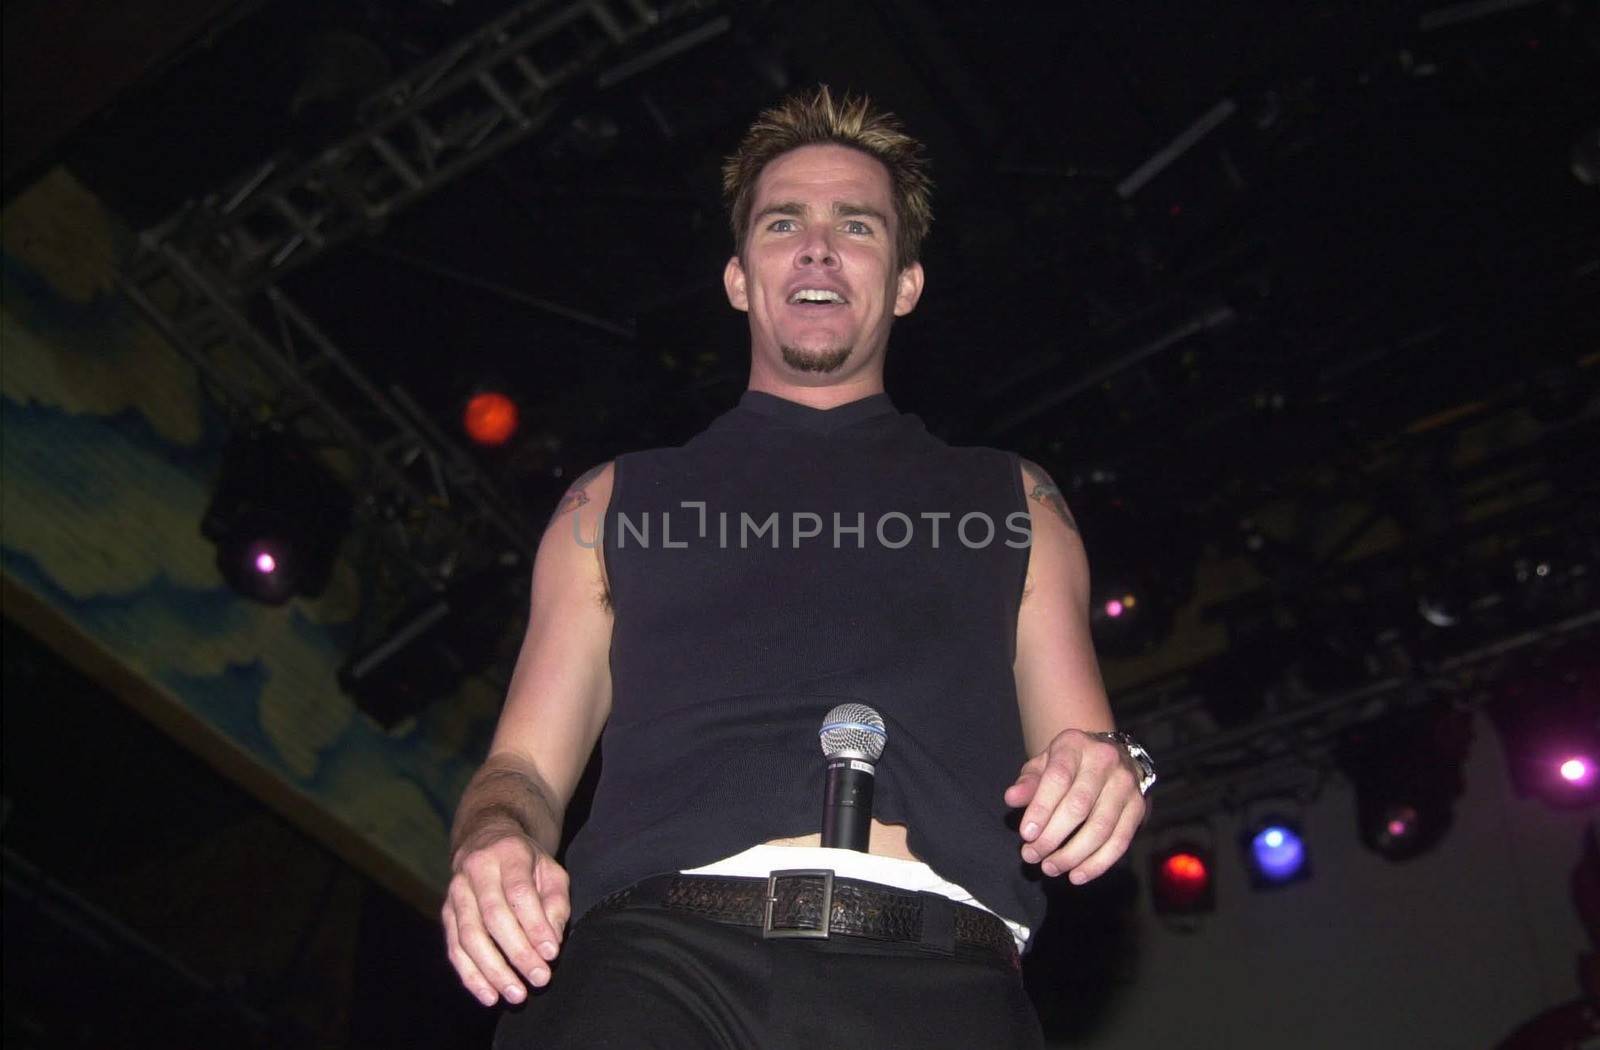 Mark McGrath at the "Drive Me Crazy" launch party, House Of Blues, Hollywood, 04-25-00